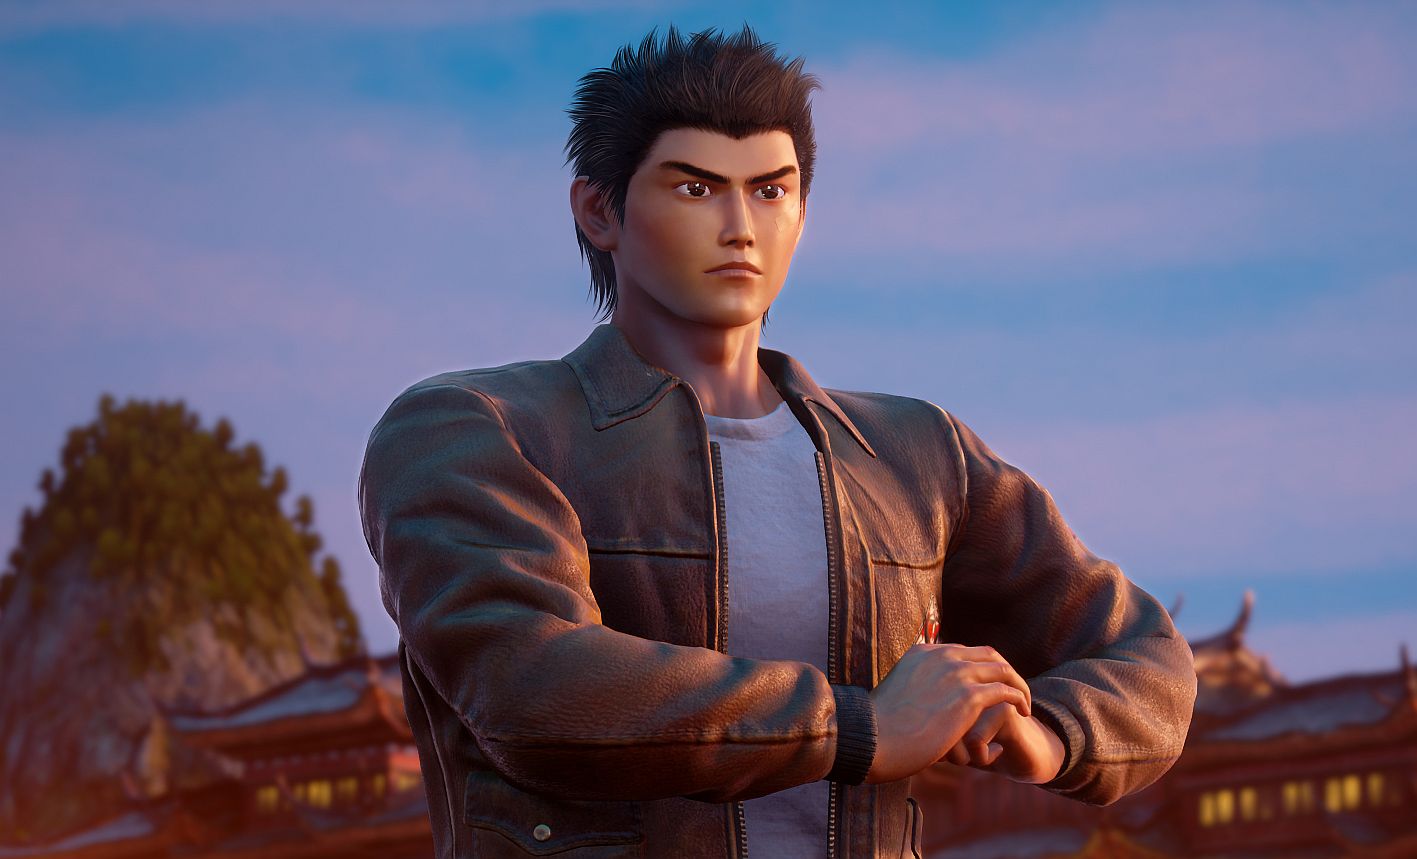 Image for Shenmue 3 double the length of prior games, side quests no longer separate from main story